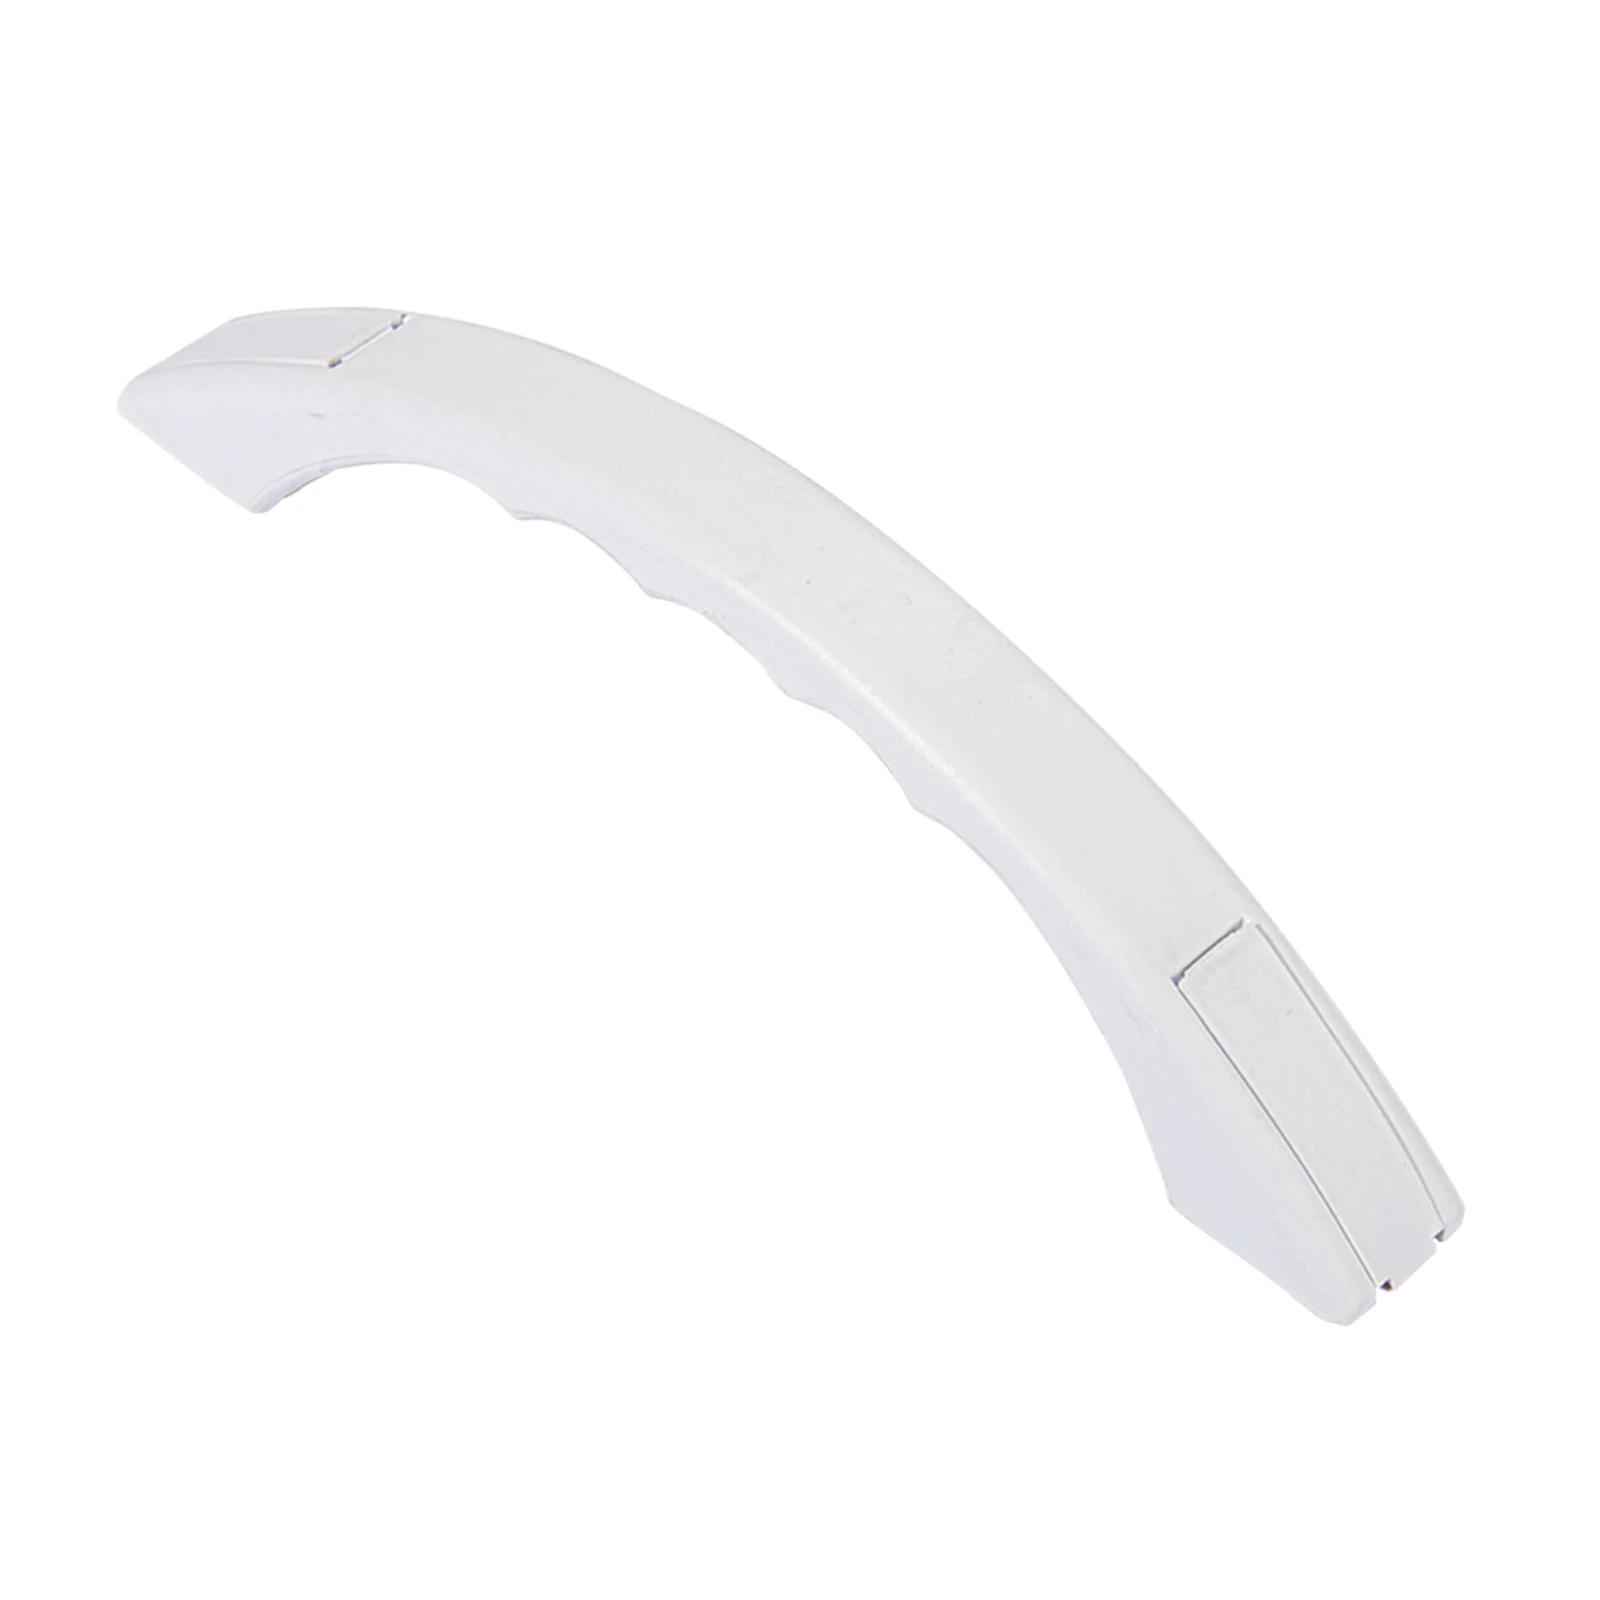 Plastic Grab Handle Entry Door Assist Bar Entry Step Support Grab Bar for RV Trailer Boats